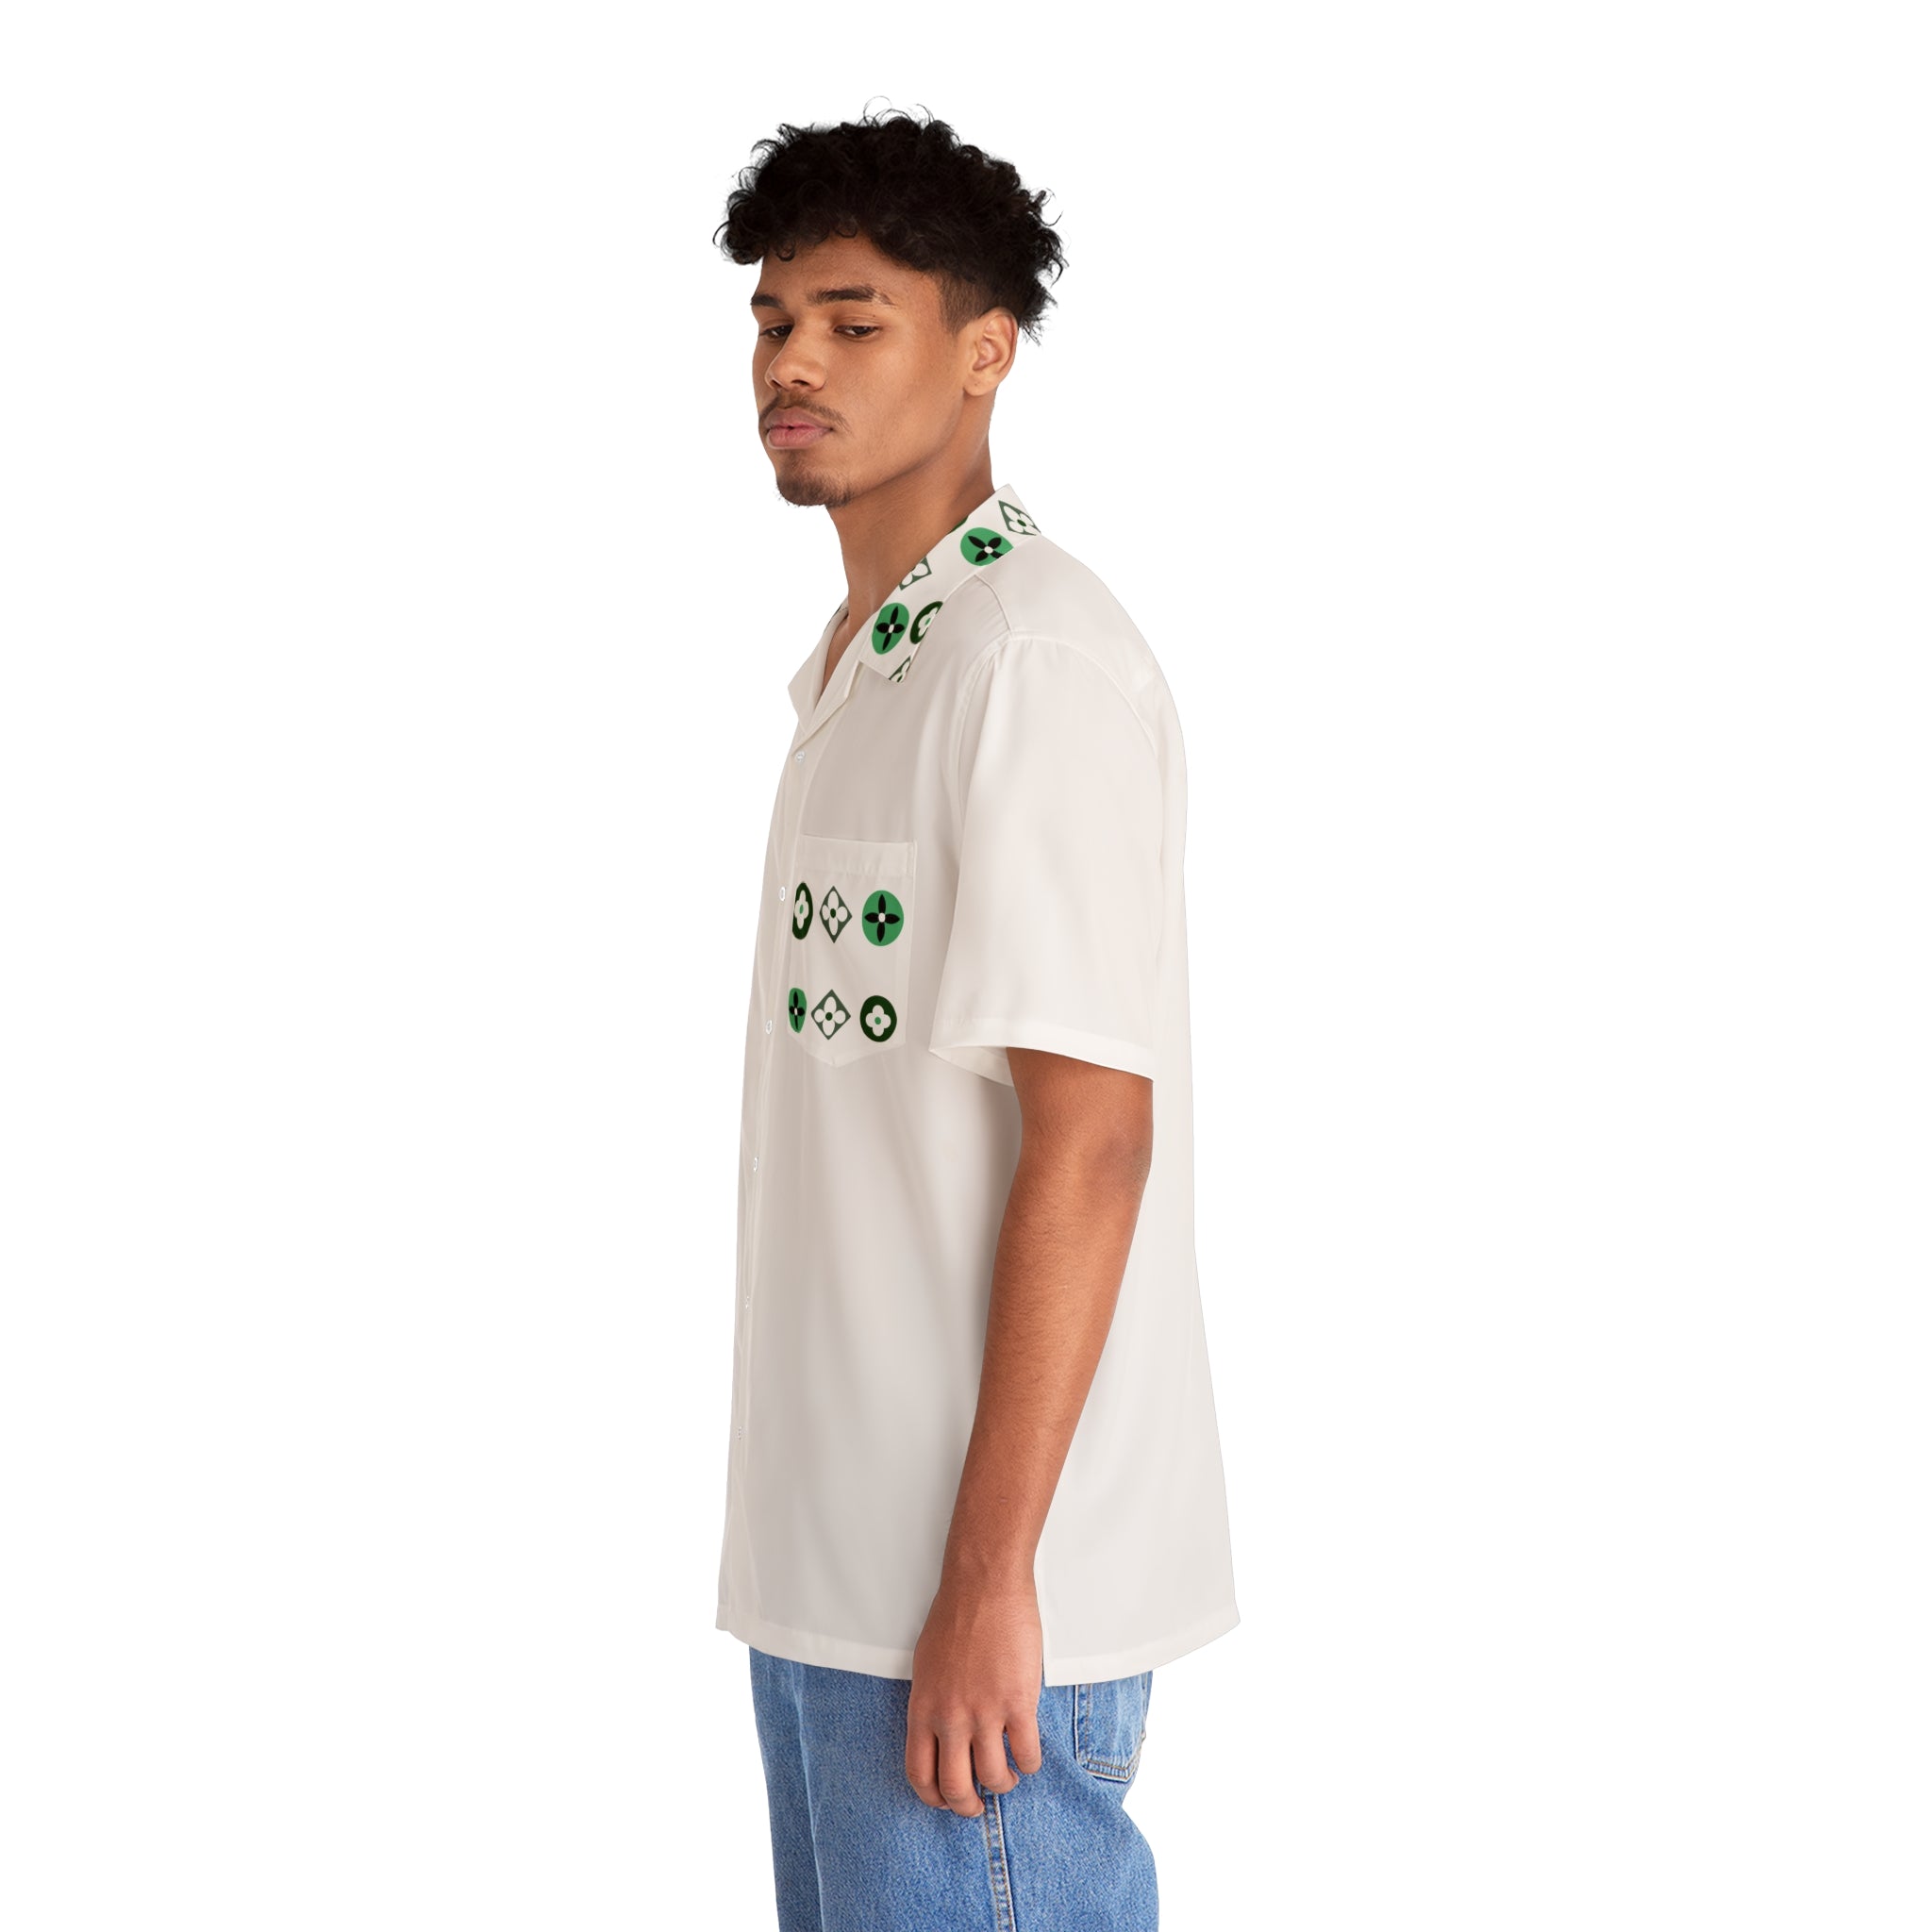 Groove Collection Trilogy of Icons Pocket Grid (Greens) White Unisex Gender Neutral Button Up Shirt, Hawaiian Shirt